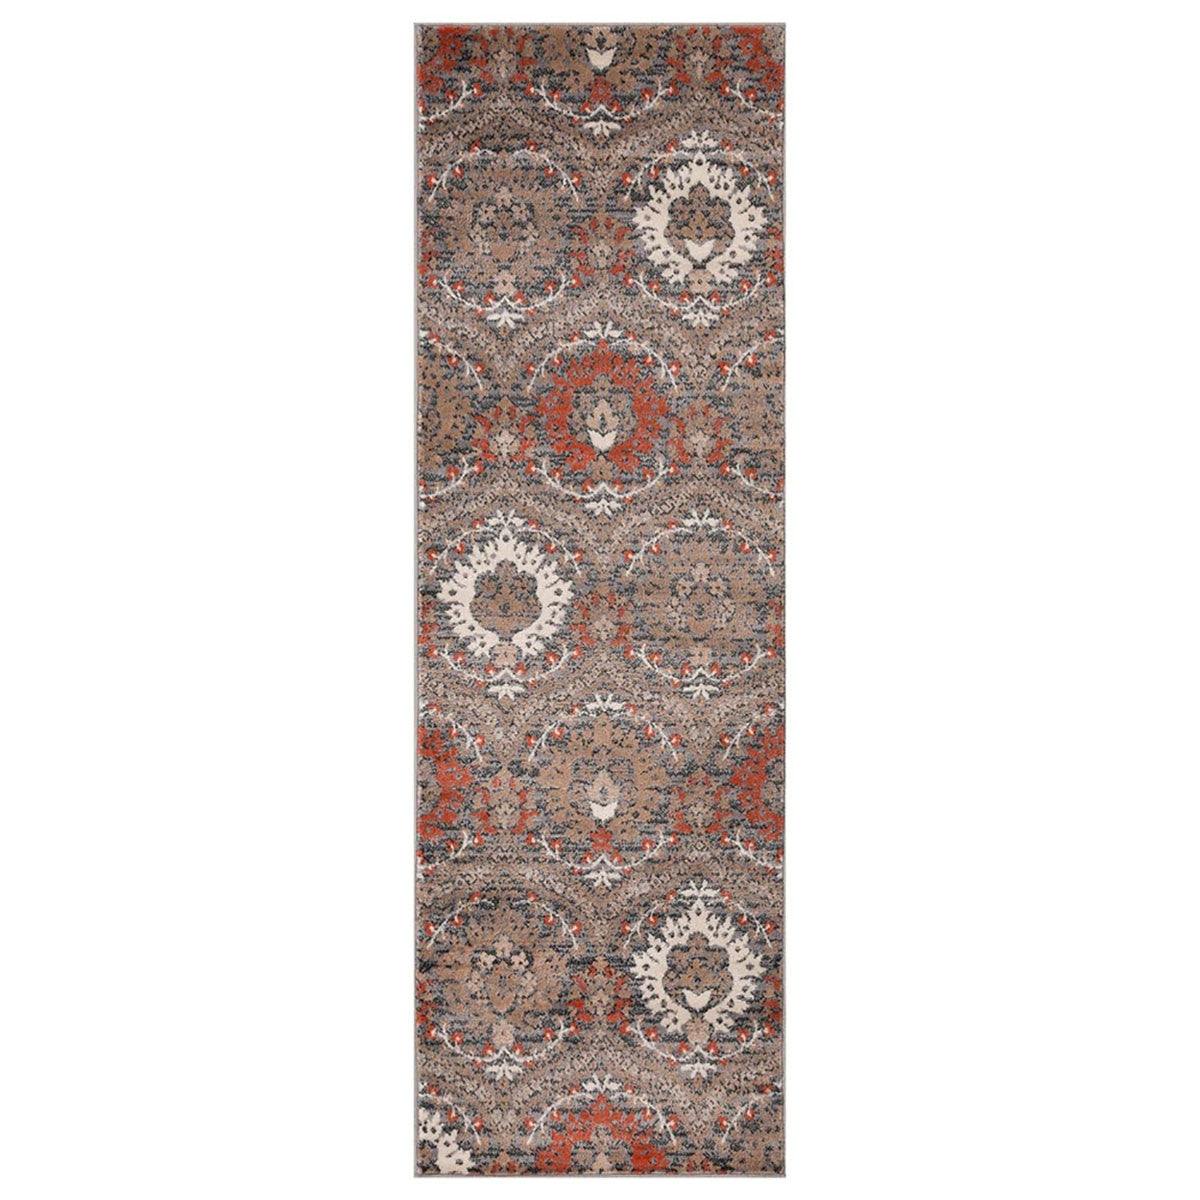 10' Rust And Gray Floral Stain Resistant Runner Rug